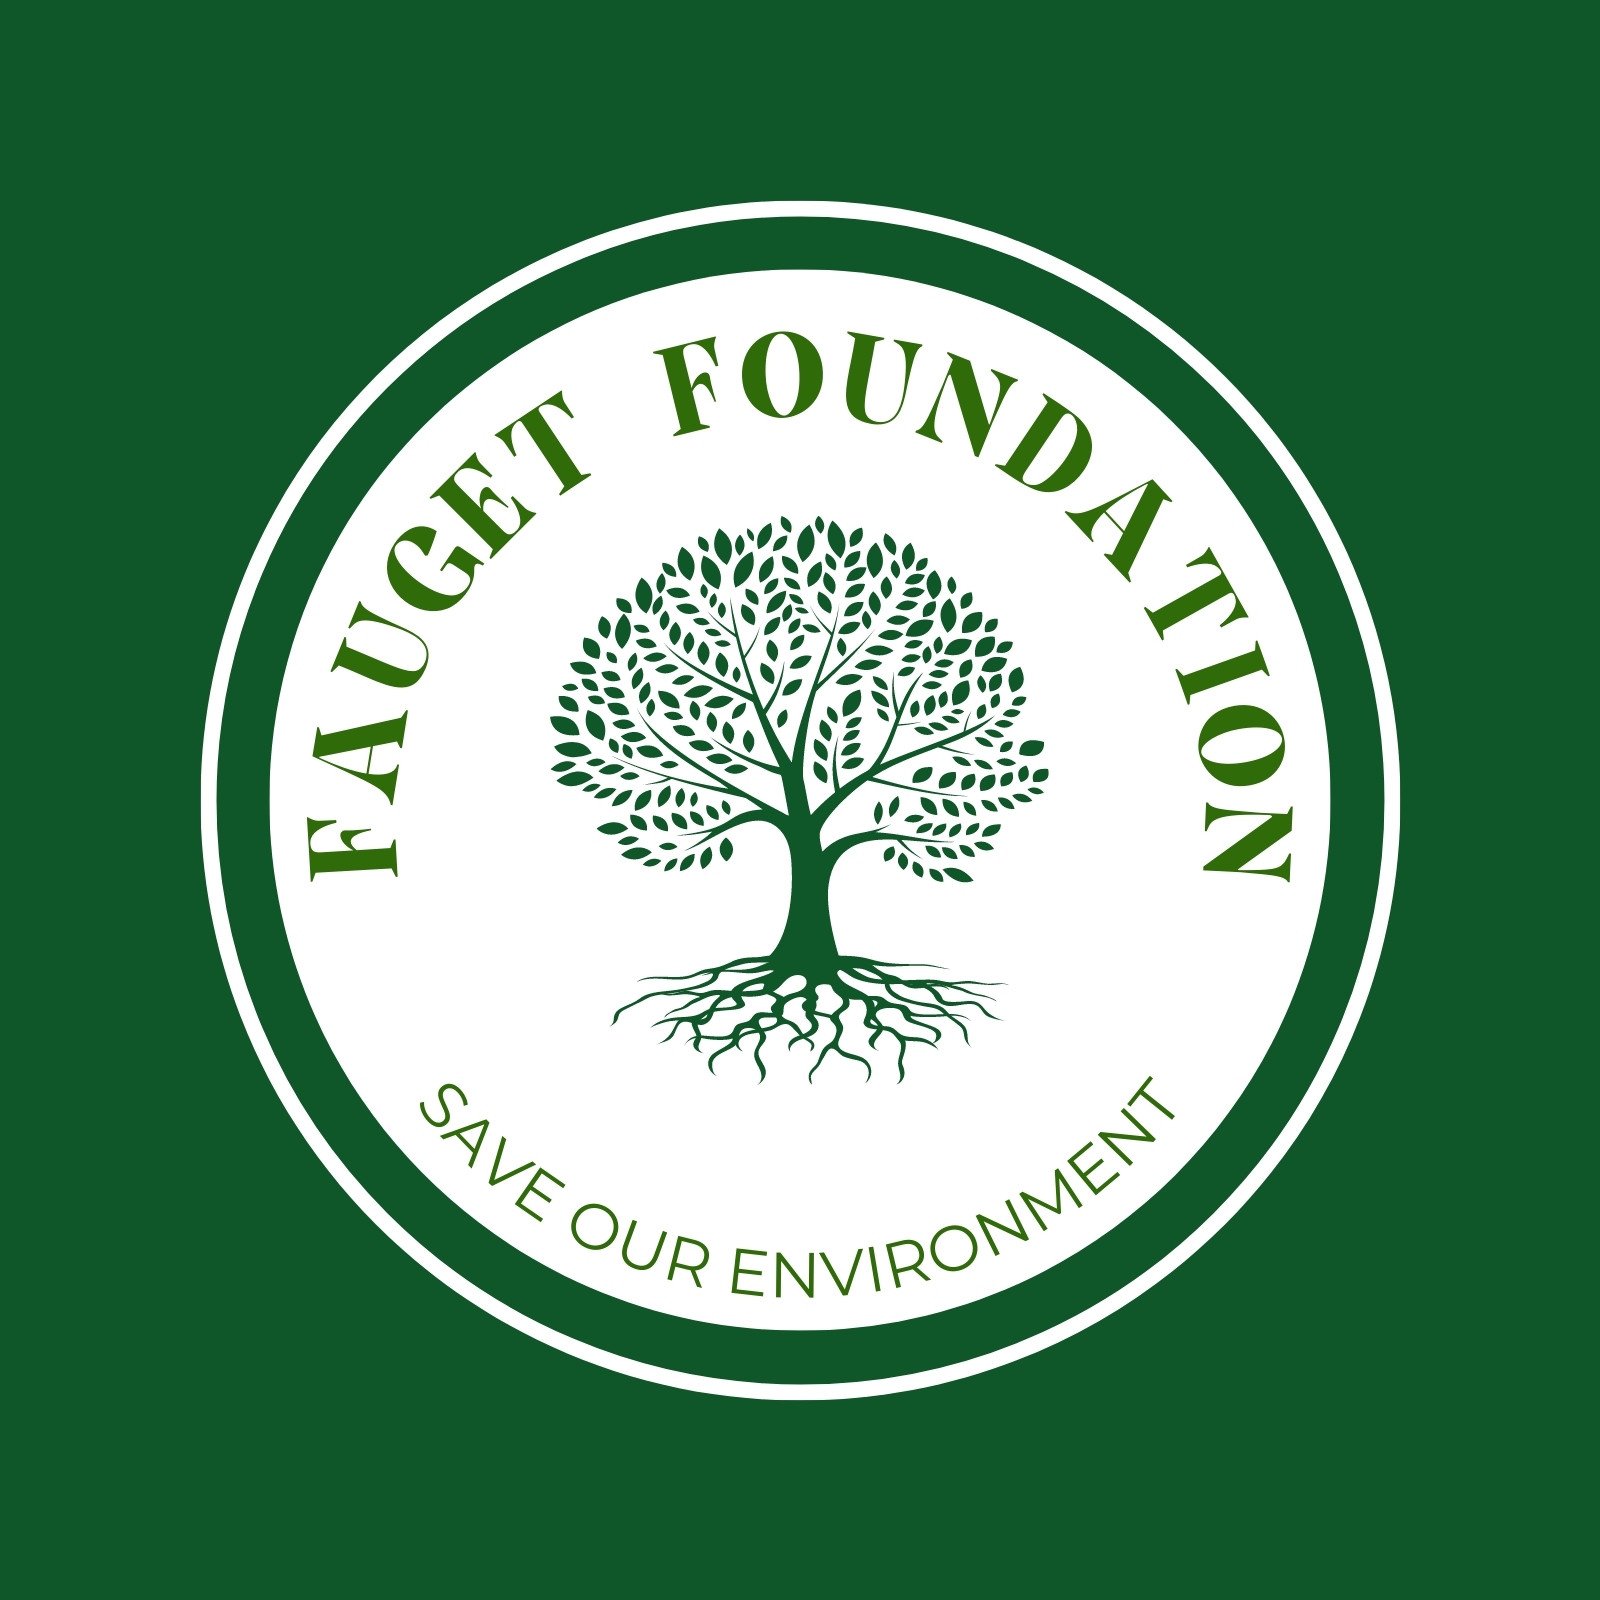 Green and White Circle Foundation Logo